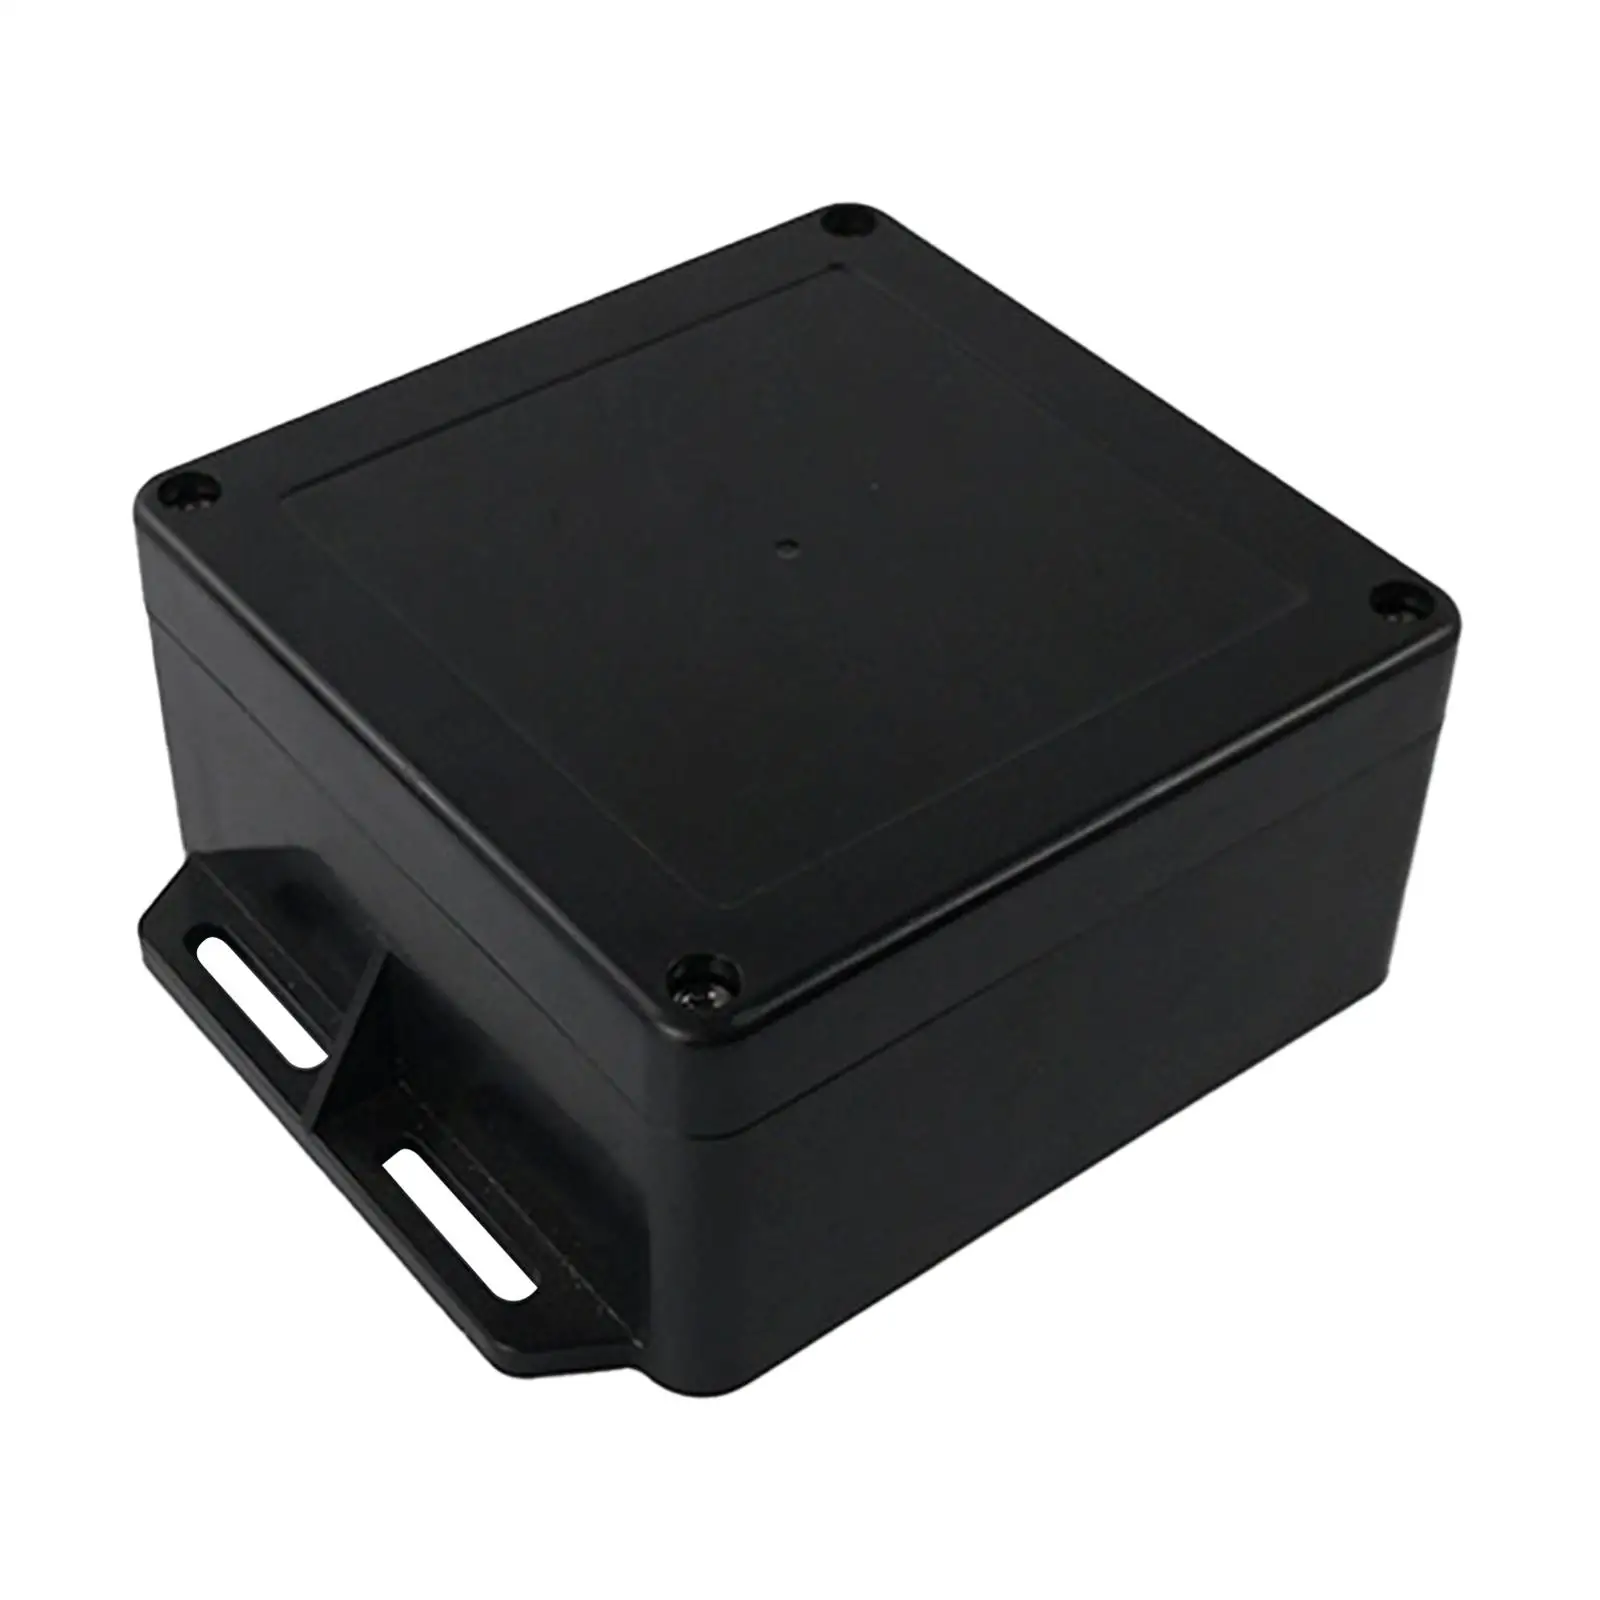 Waterproof Electrical Junction Box Electrical Project Enclosure Electrical Project Case Housing Electrical Boxes 12cmx12cmx6cm